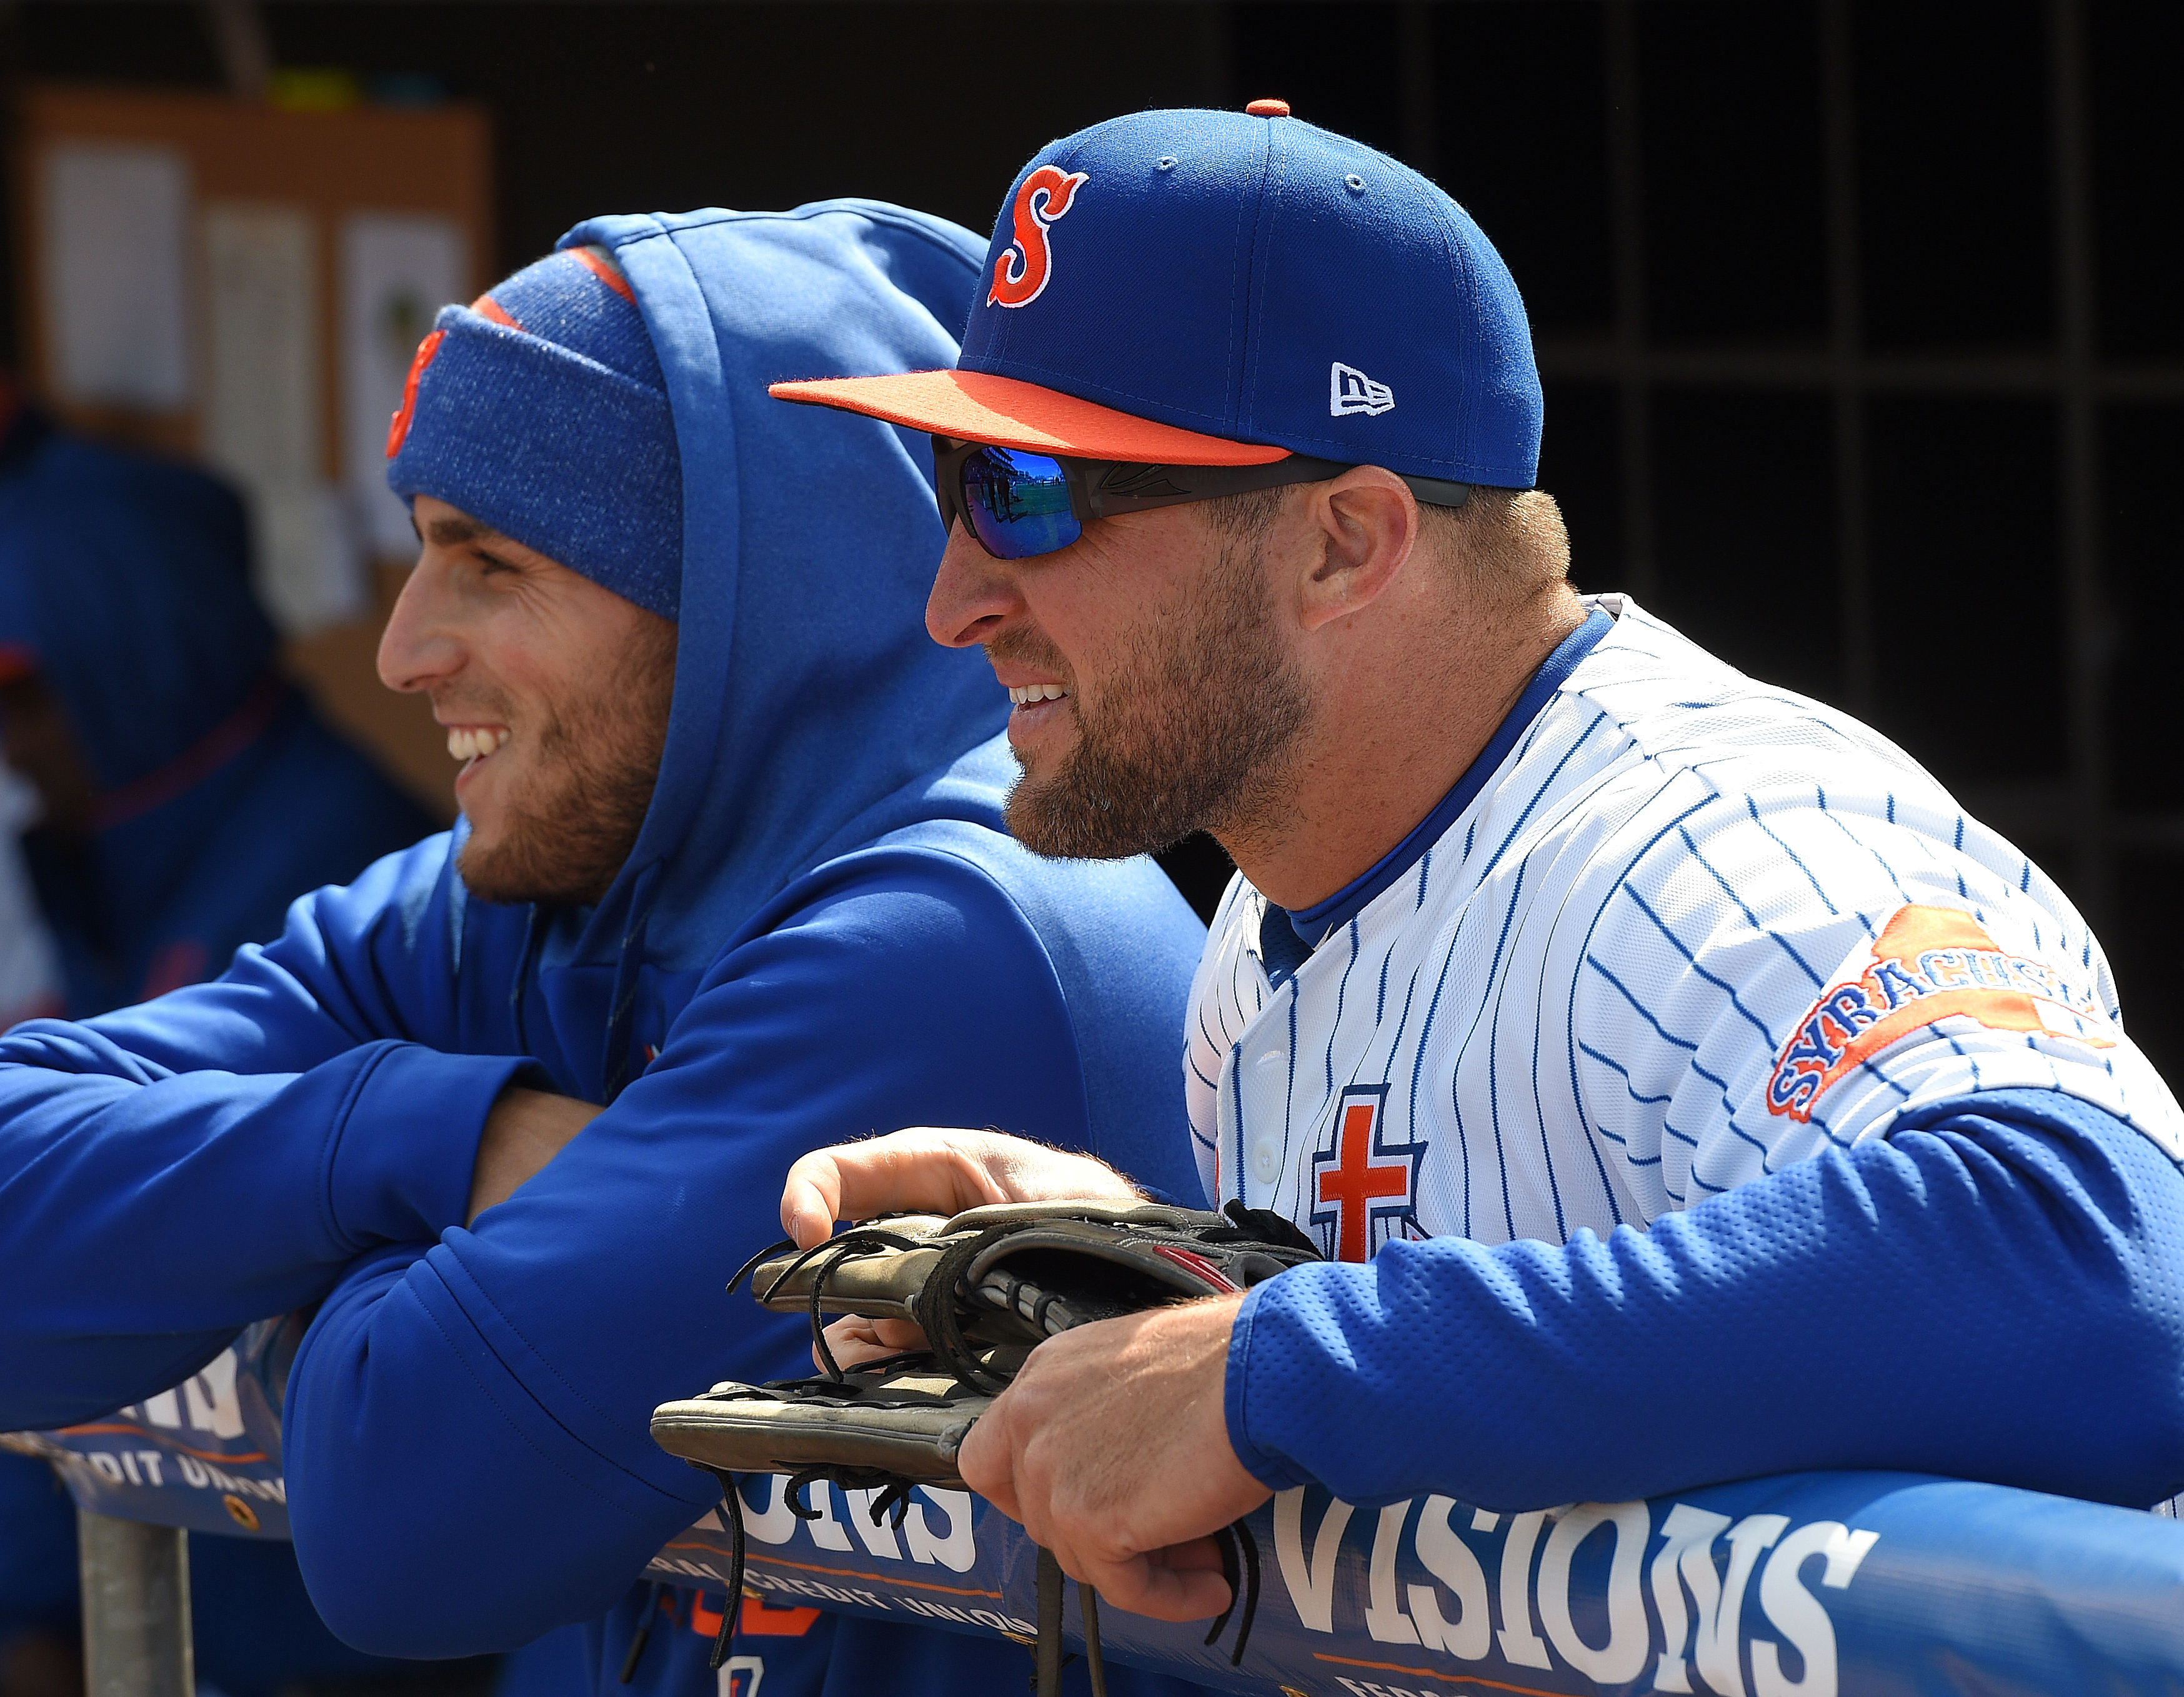 Why Mets still want Tim Tebow, who will return in 2021 